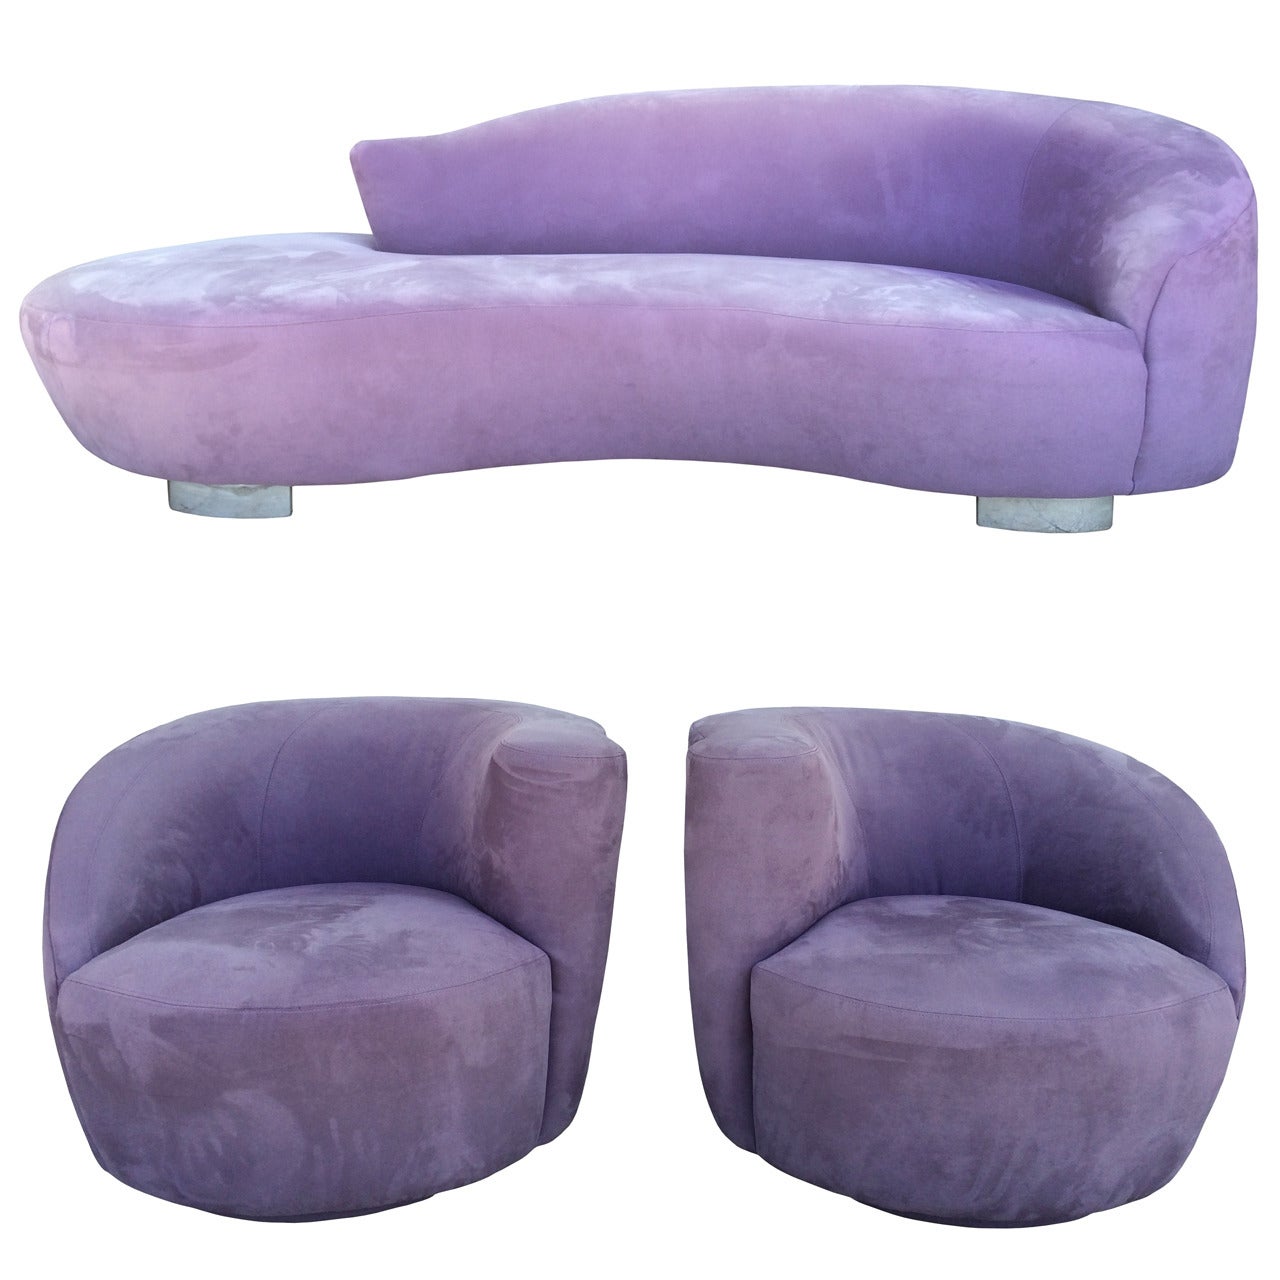 Vladimir Kagan Serpentine Sofa and Nautilus Chairs by Preview